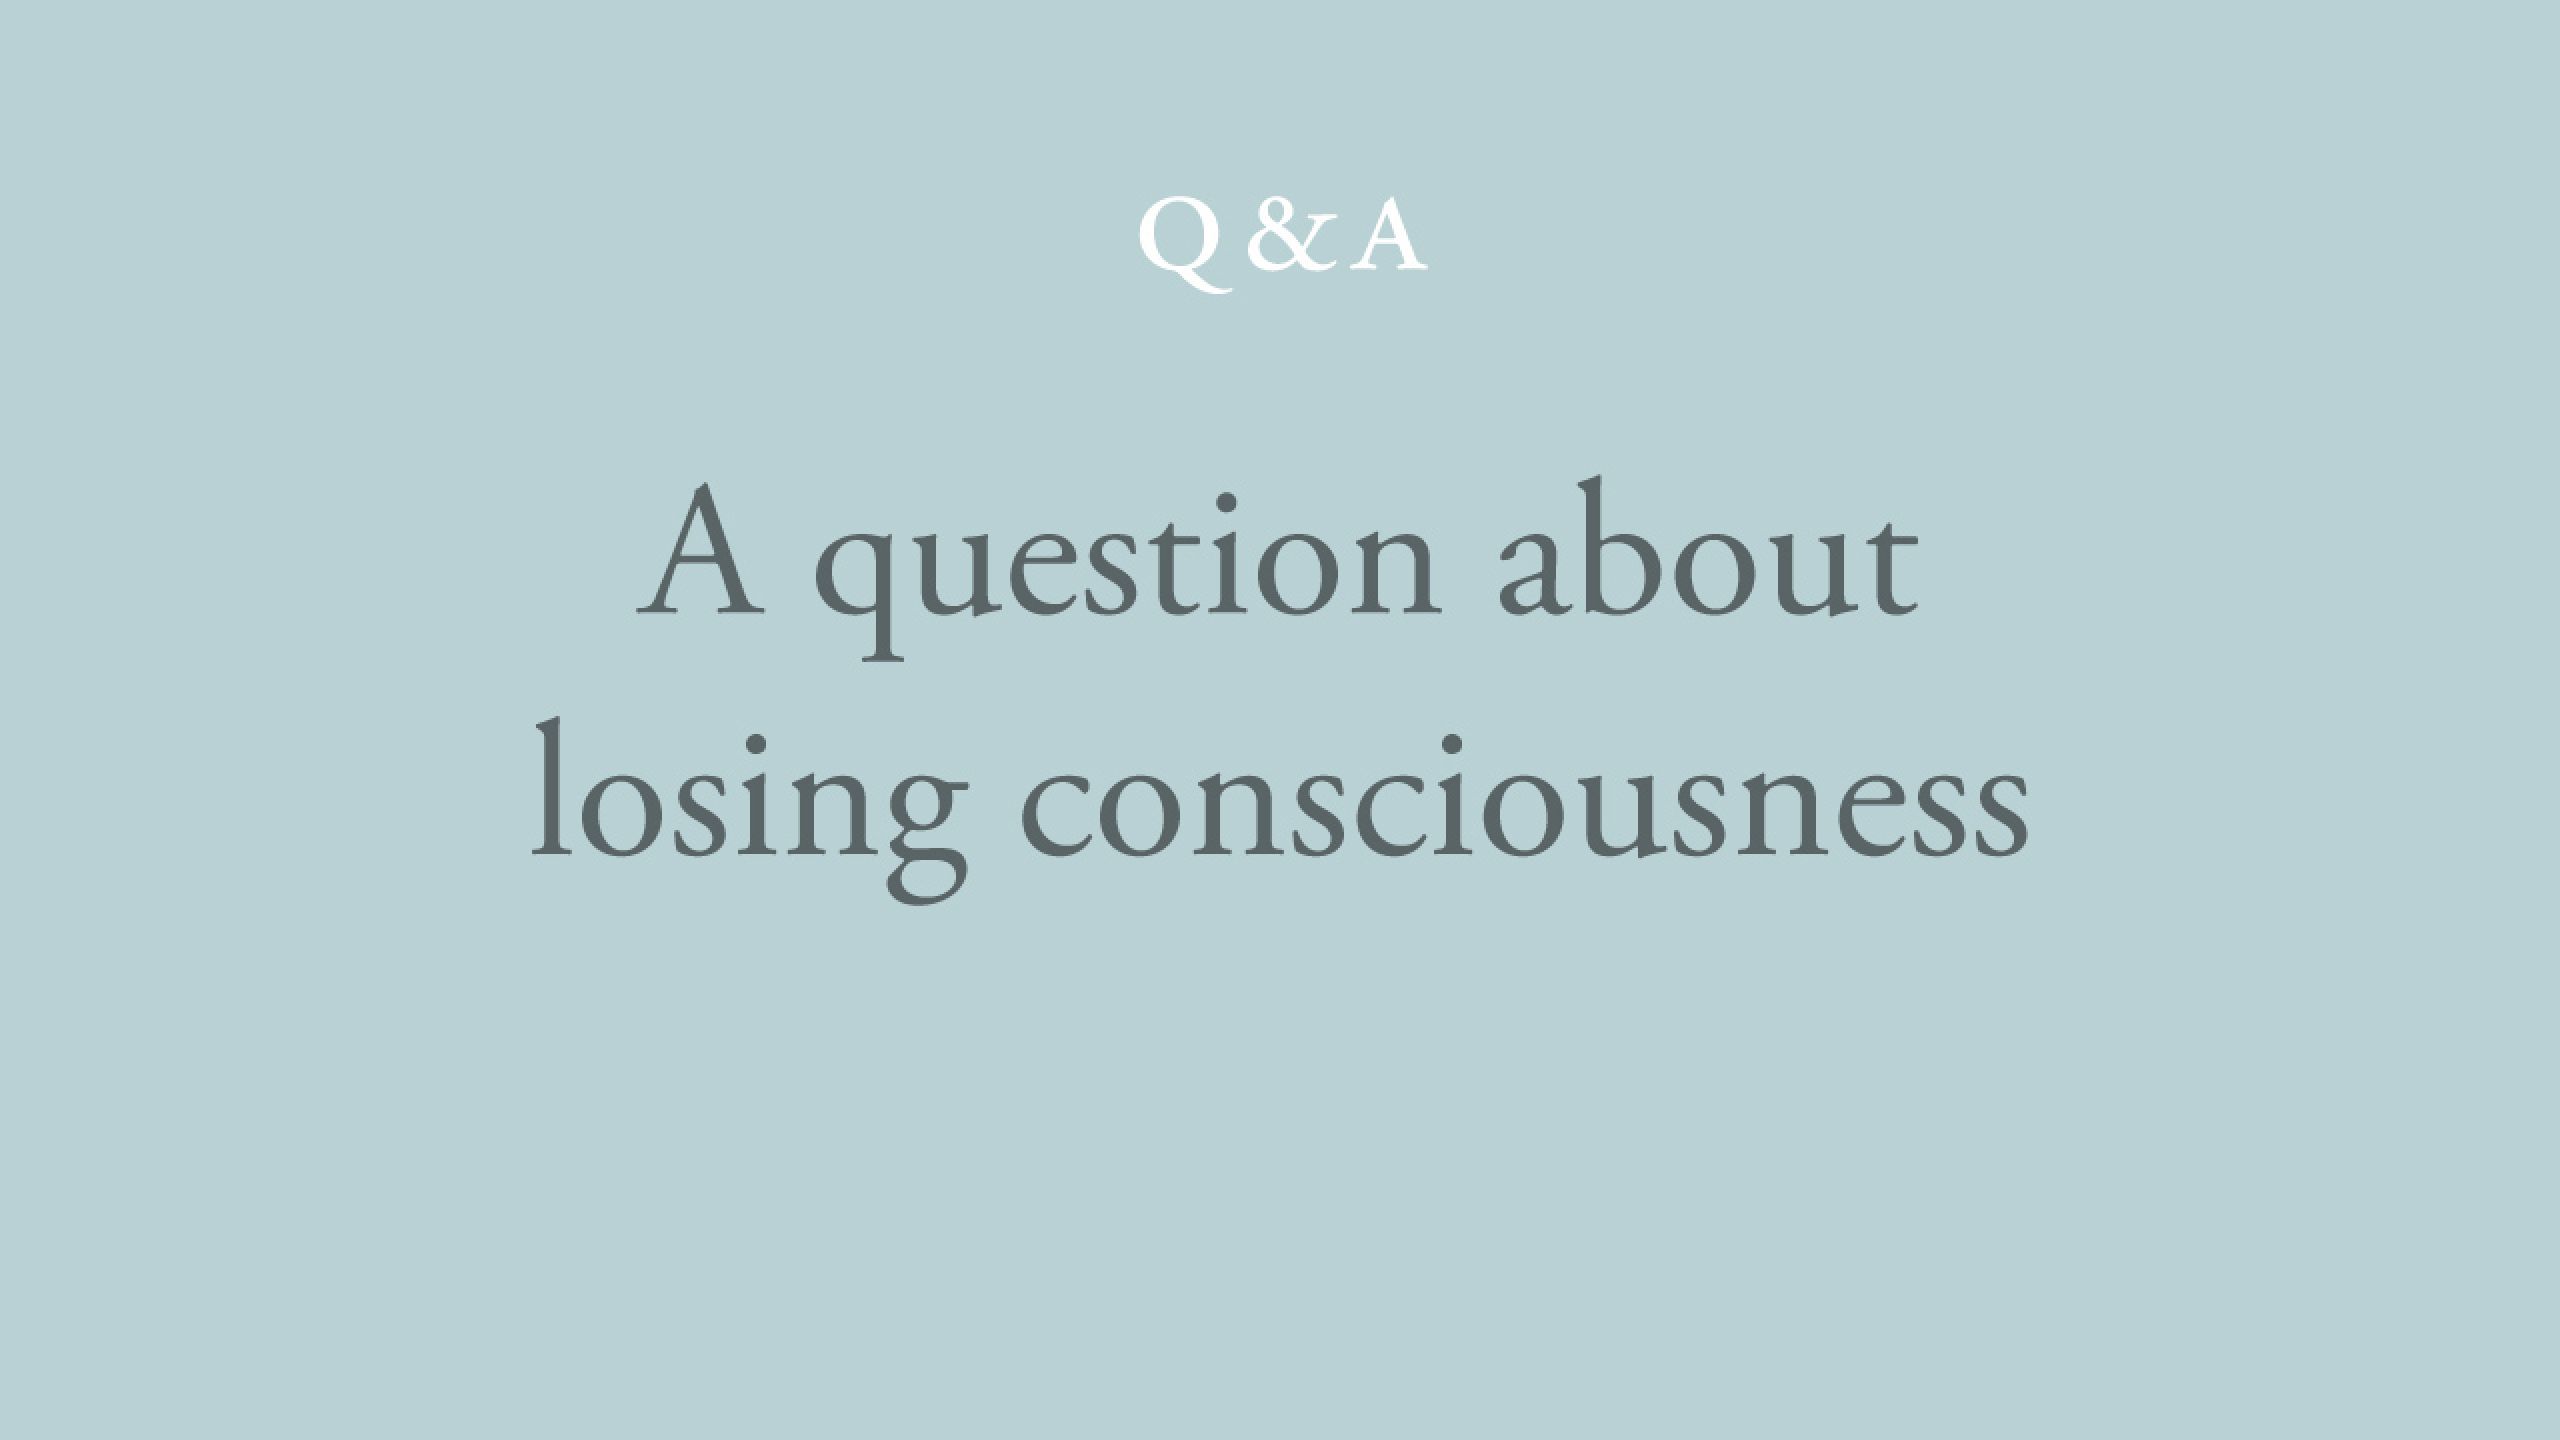 Are we conscious when we lose consciousness?